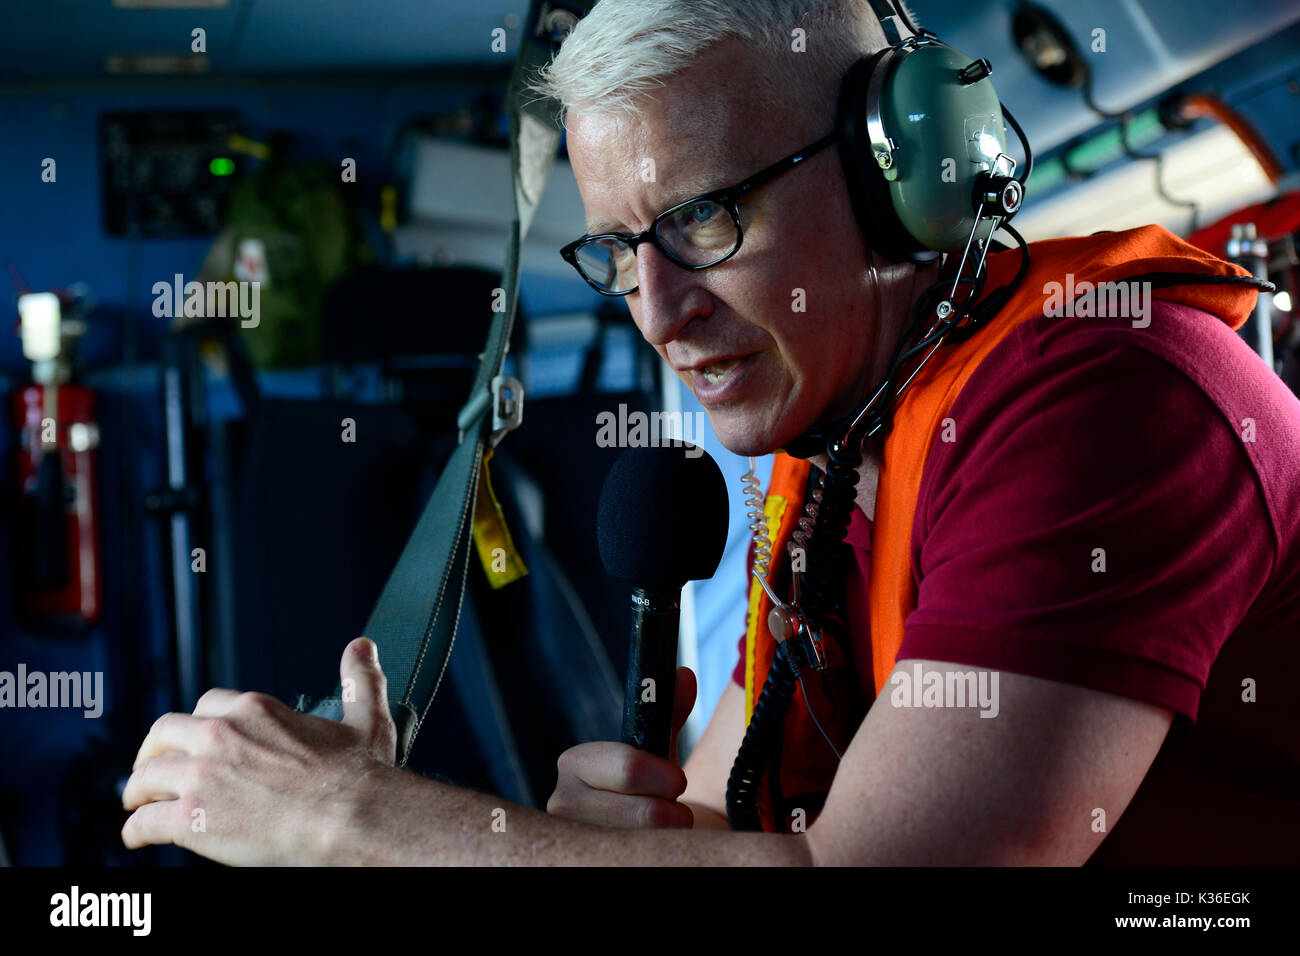 Houston, United States. 31st Aug, 2017. CNN news anchor Anderson Cooper reports live from a U.S. Coast Guard MH-60 Jayhawk helicopter during a rescue mission in the aftermath of Hurricane Harvey August 31, 2017 in Houston, Texas. Credit: Planetpix/Alamy Live News Stock Photo